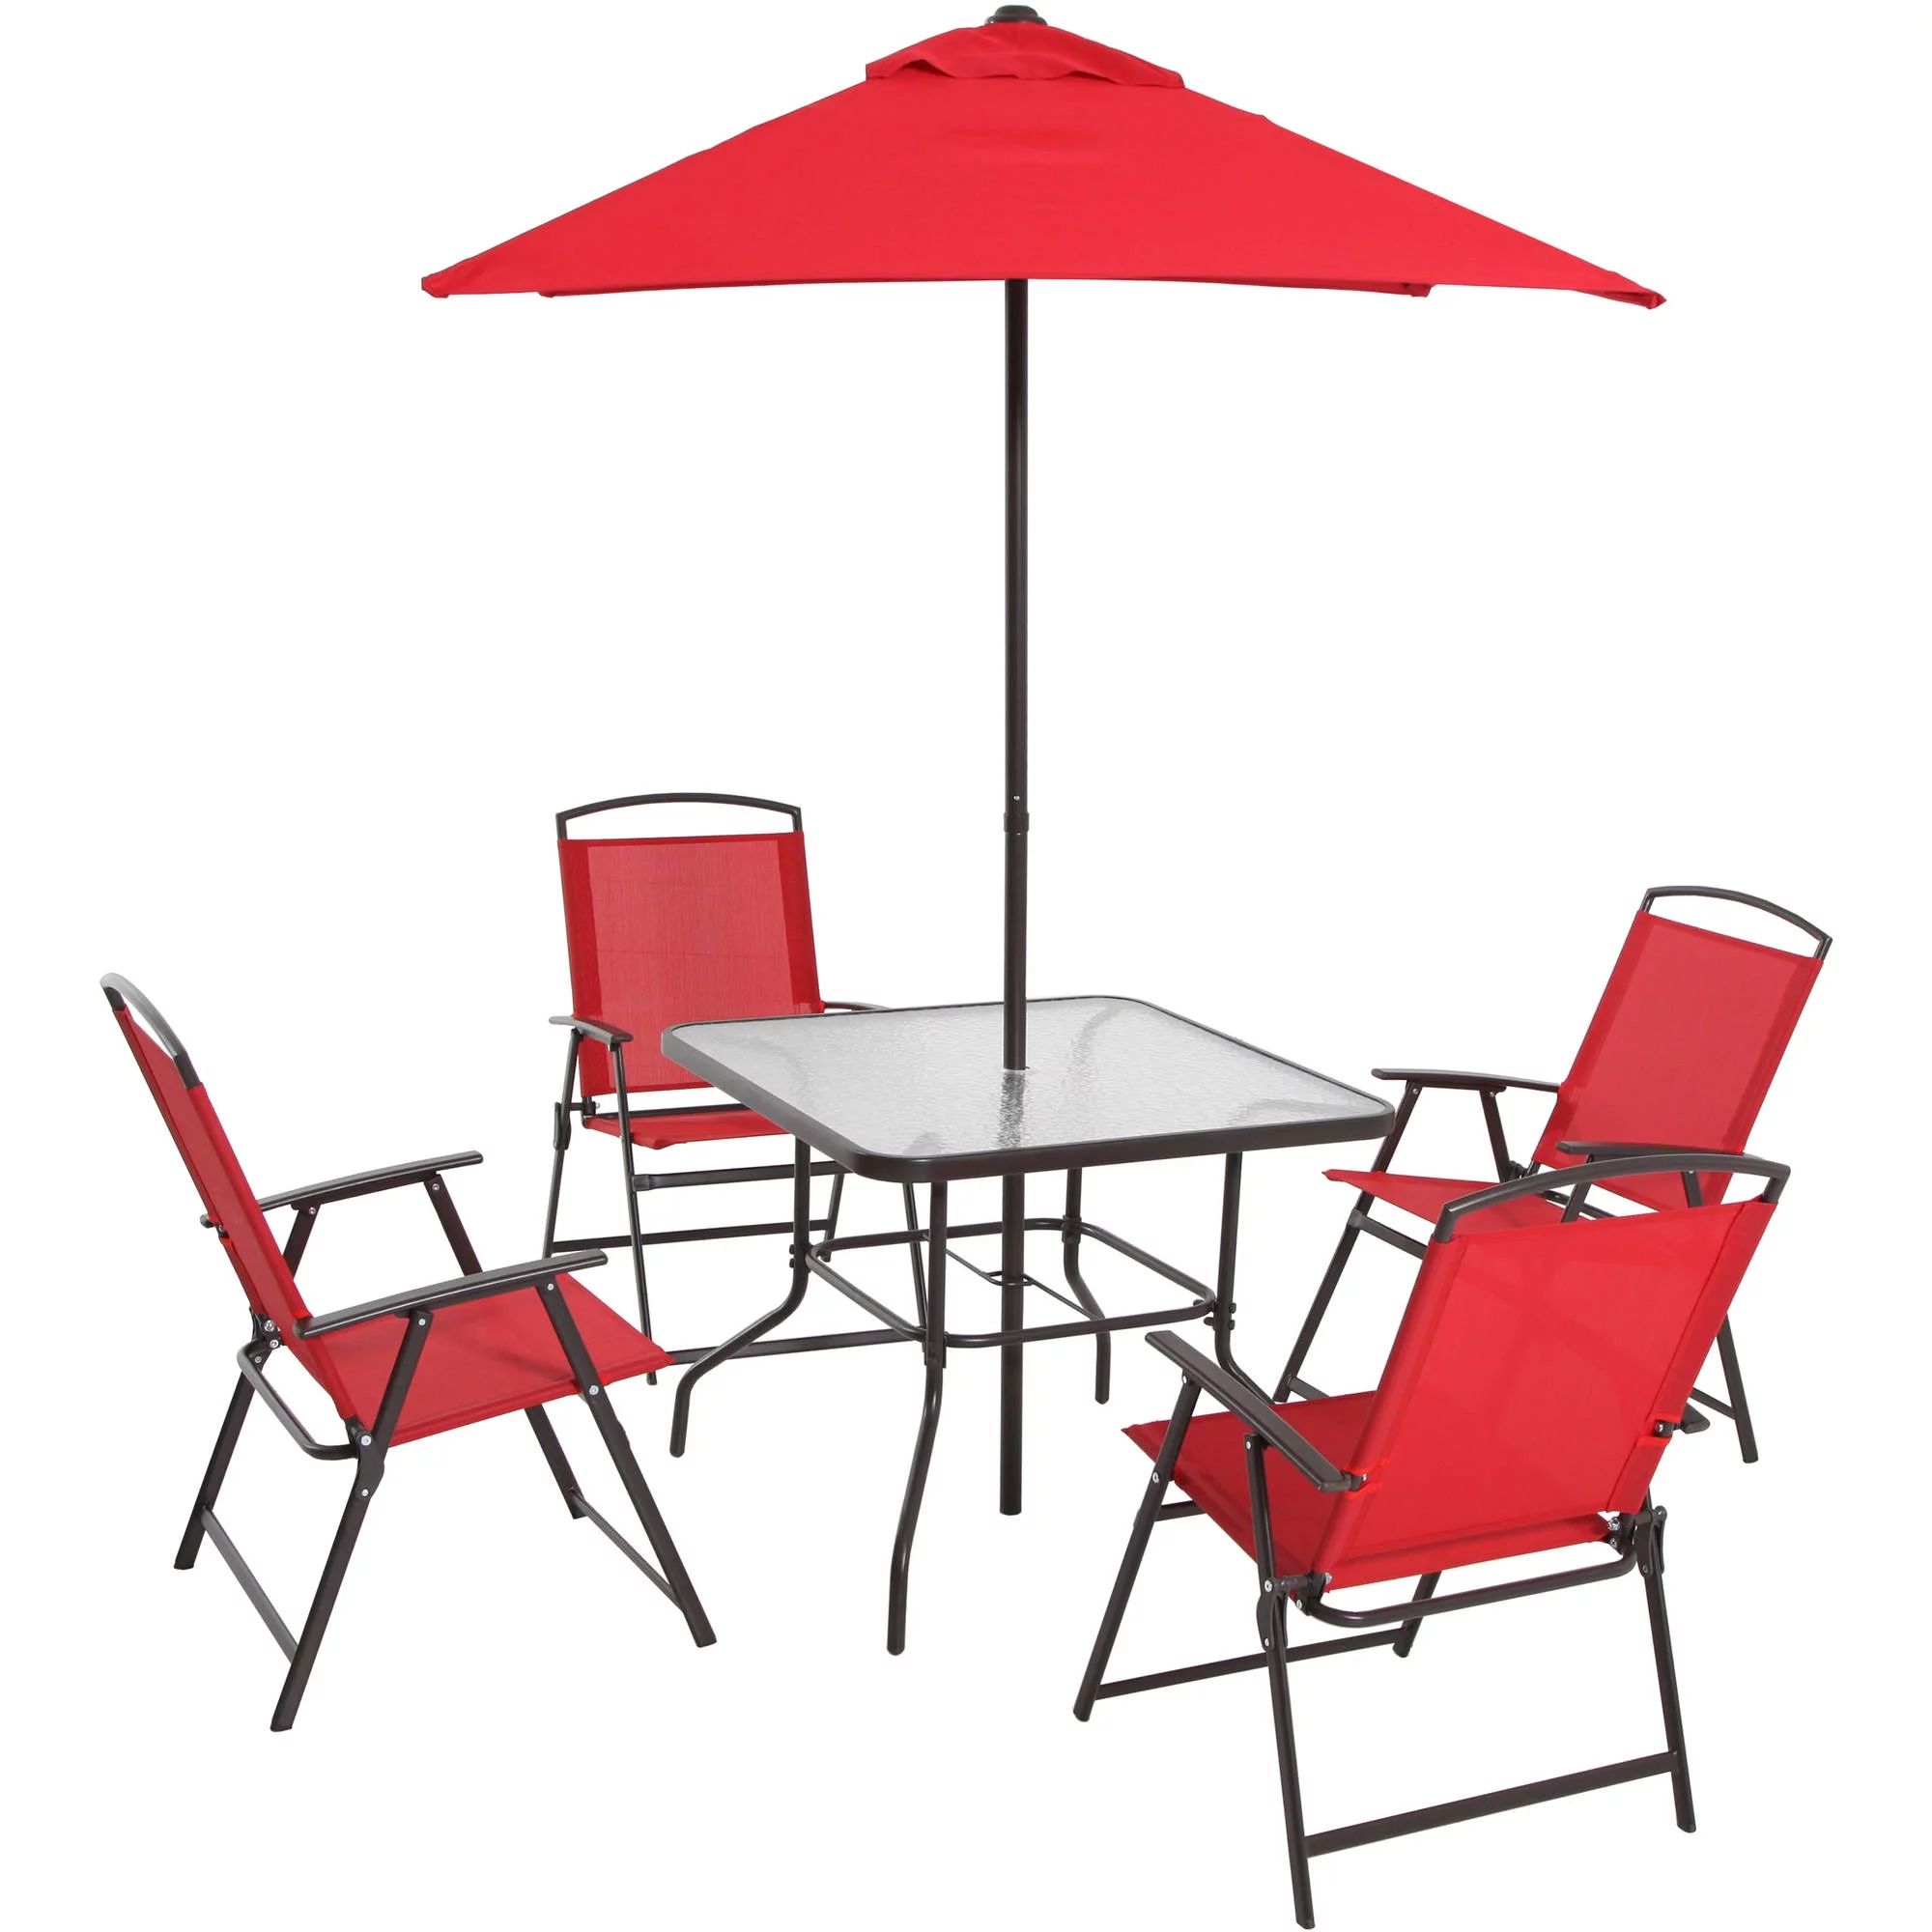 Mainstays Albany Lane Steel Outdoor Patio Dining Set of 6, Red | Walmart (US)